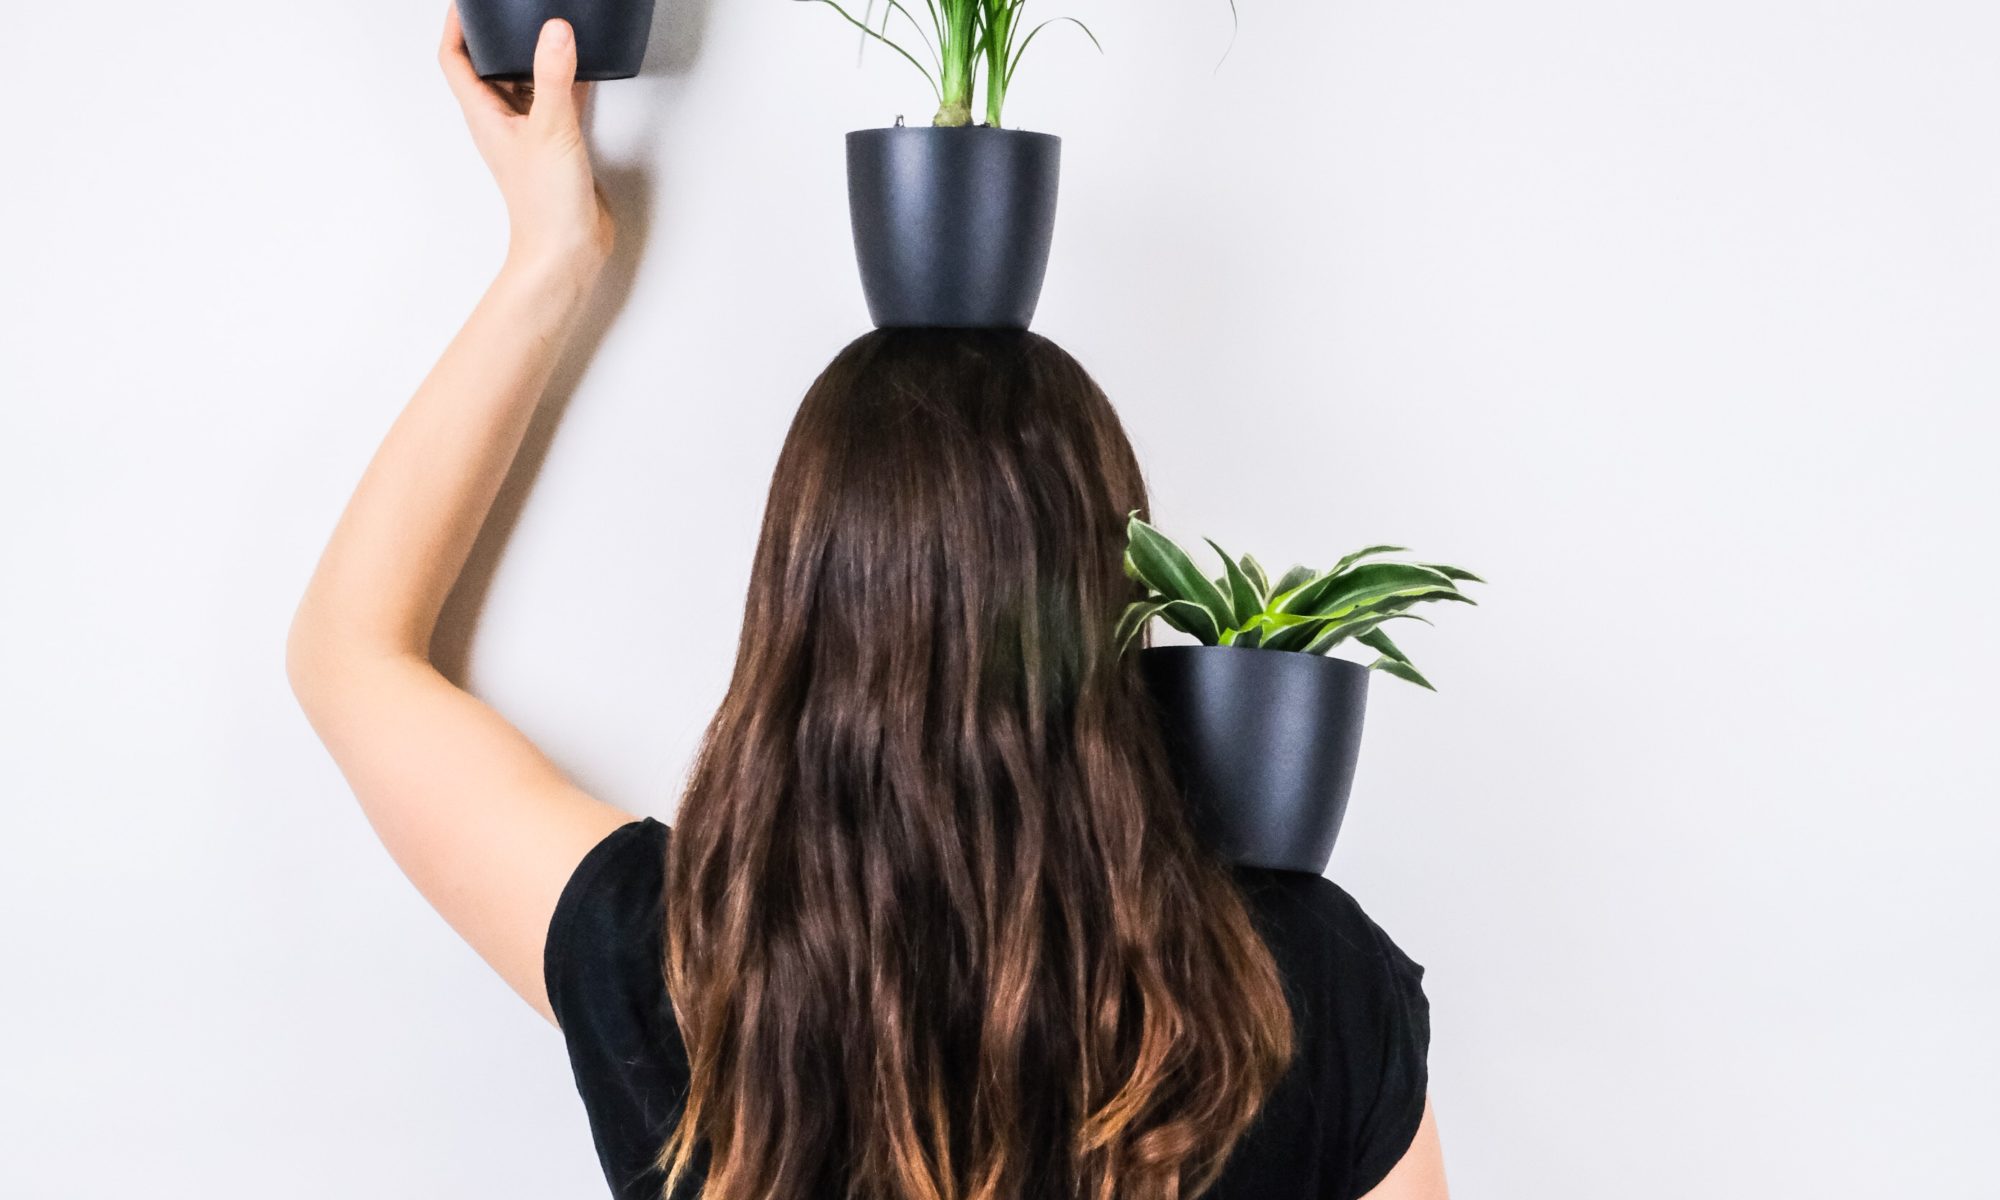 woman in black sleeveless shirt holding green potted plant